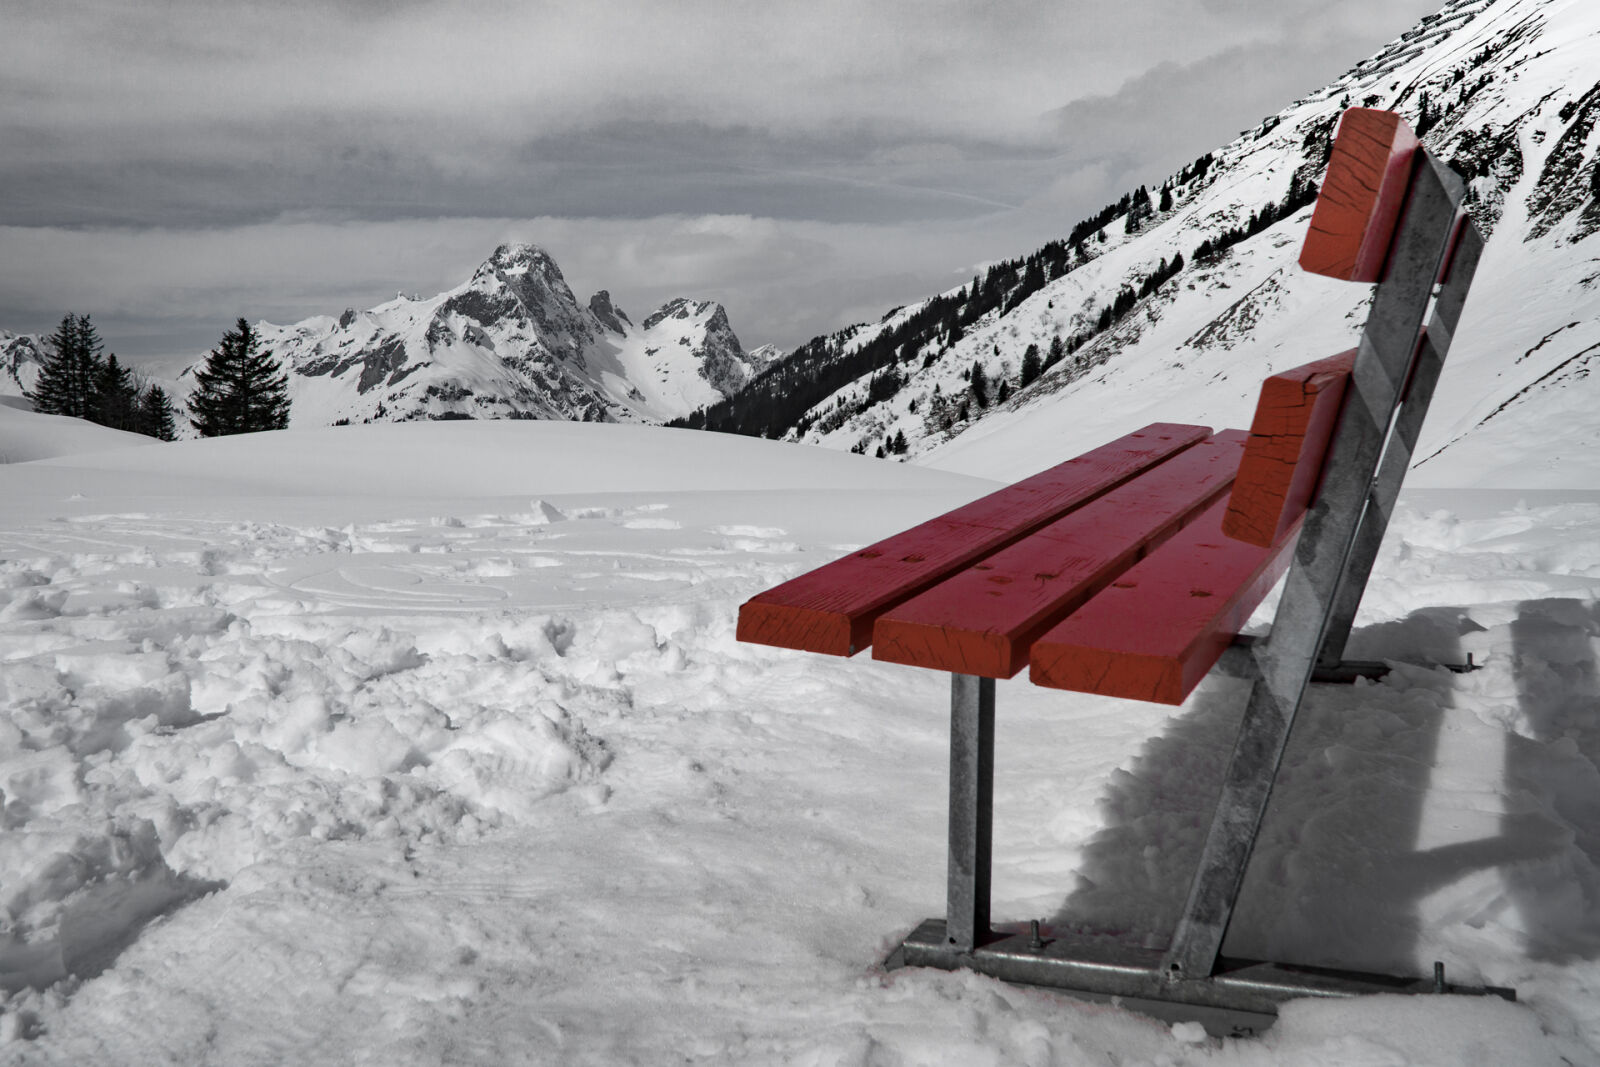 Sony E PZ 18-105mm F4 G OSS sample photo. Snow, bench, mountains, red photography